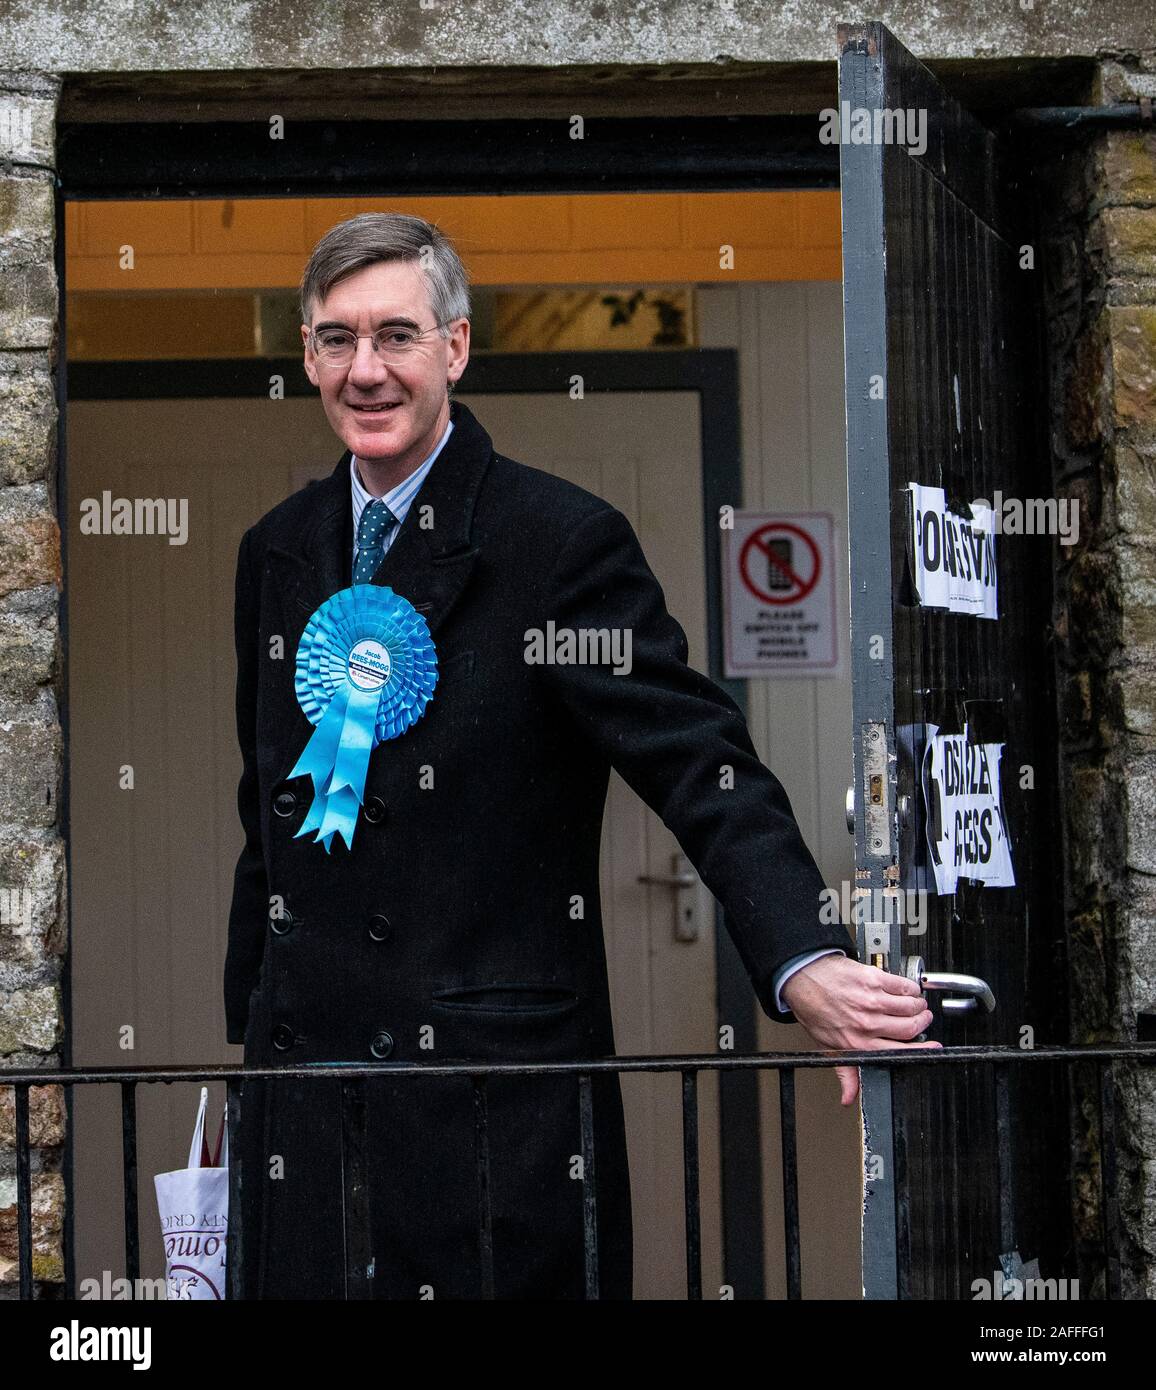 Conservative party candidate for North East Somerset Jacob Rees-Mogg casts his vote for the General Election at his local Polling Station. Stock Photo